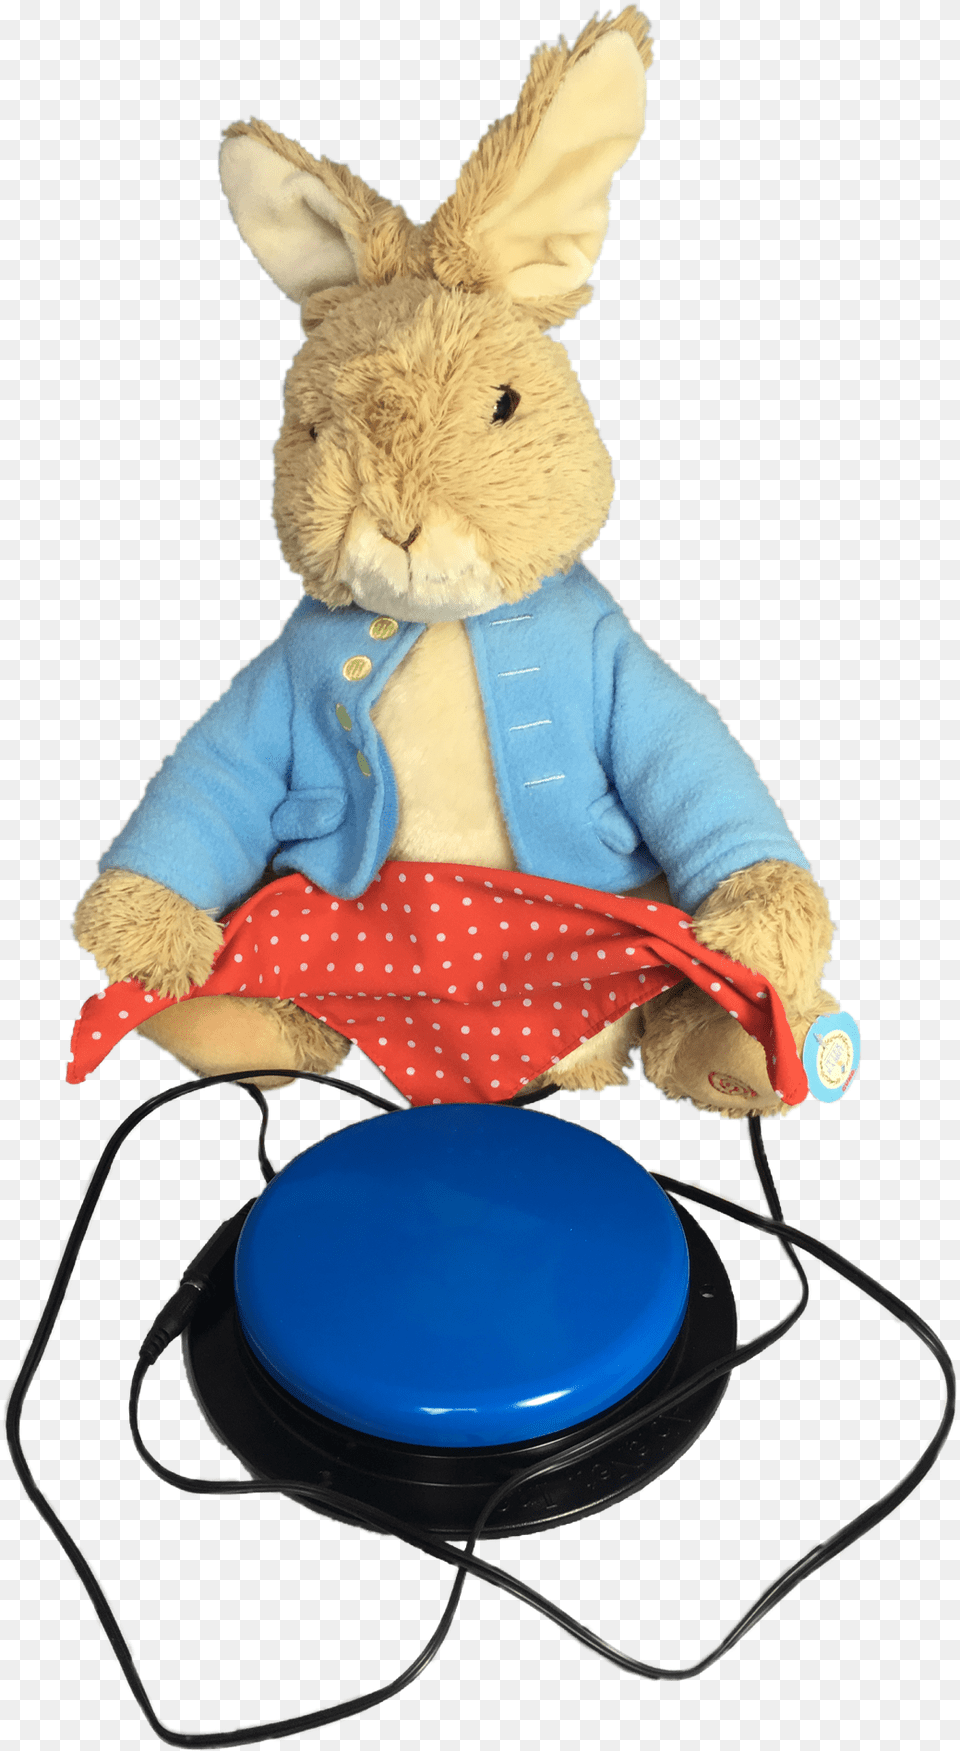 Peter Rabbit Plush Toy And Button Switch Sitting, Teddy Bear, Furniture Free Png